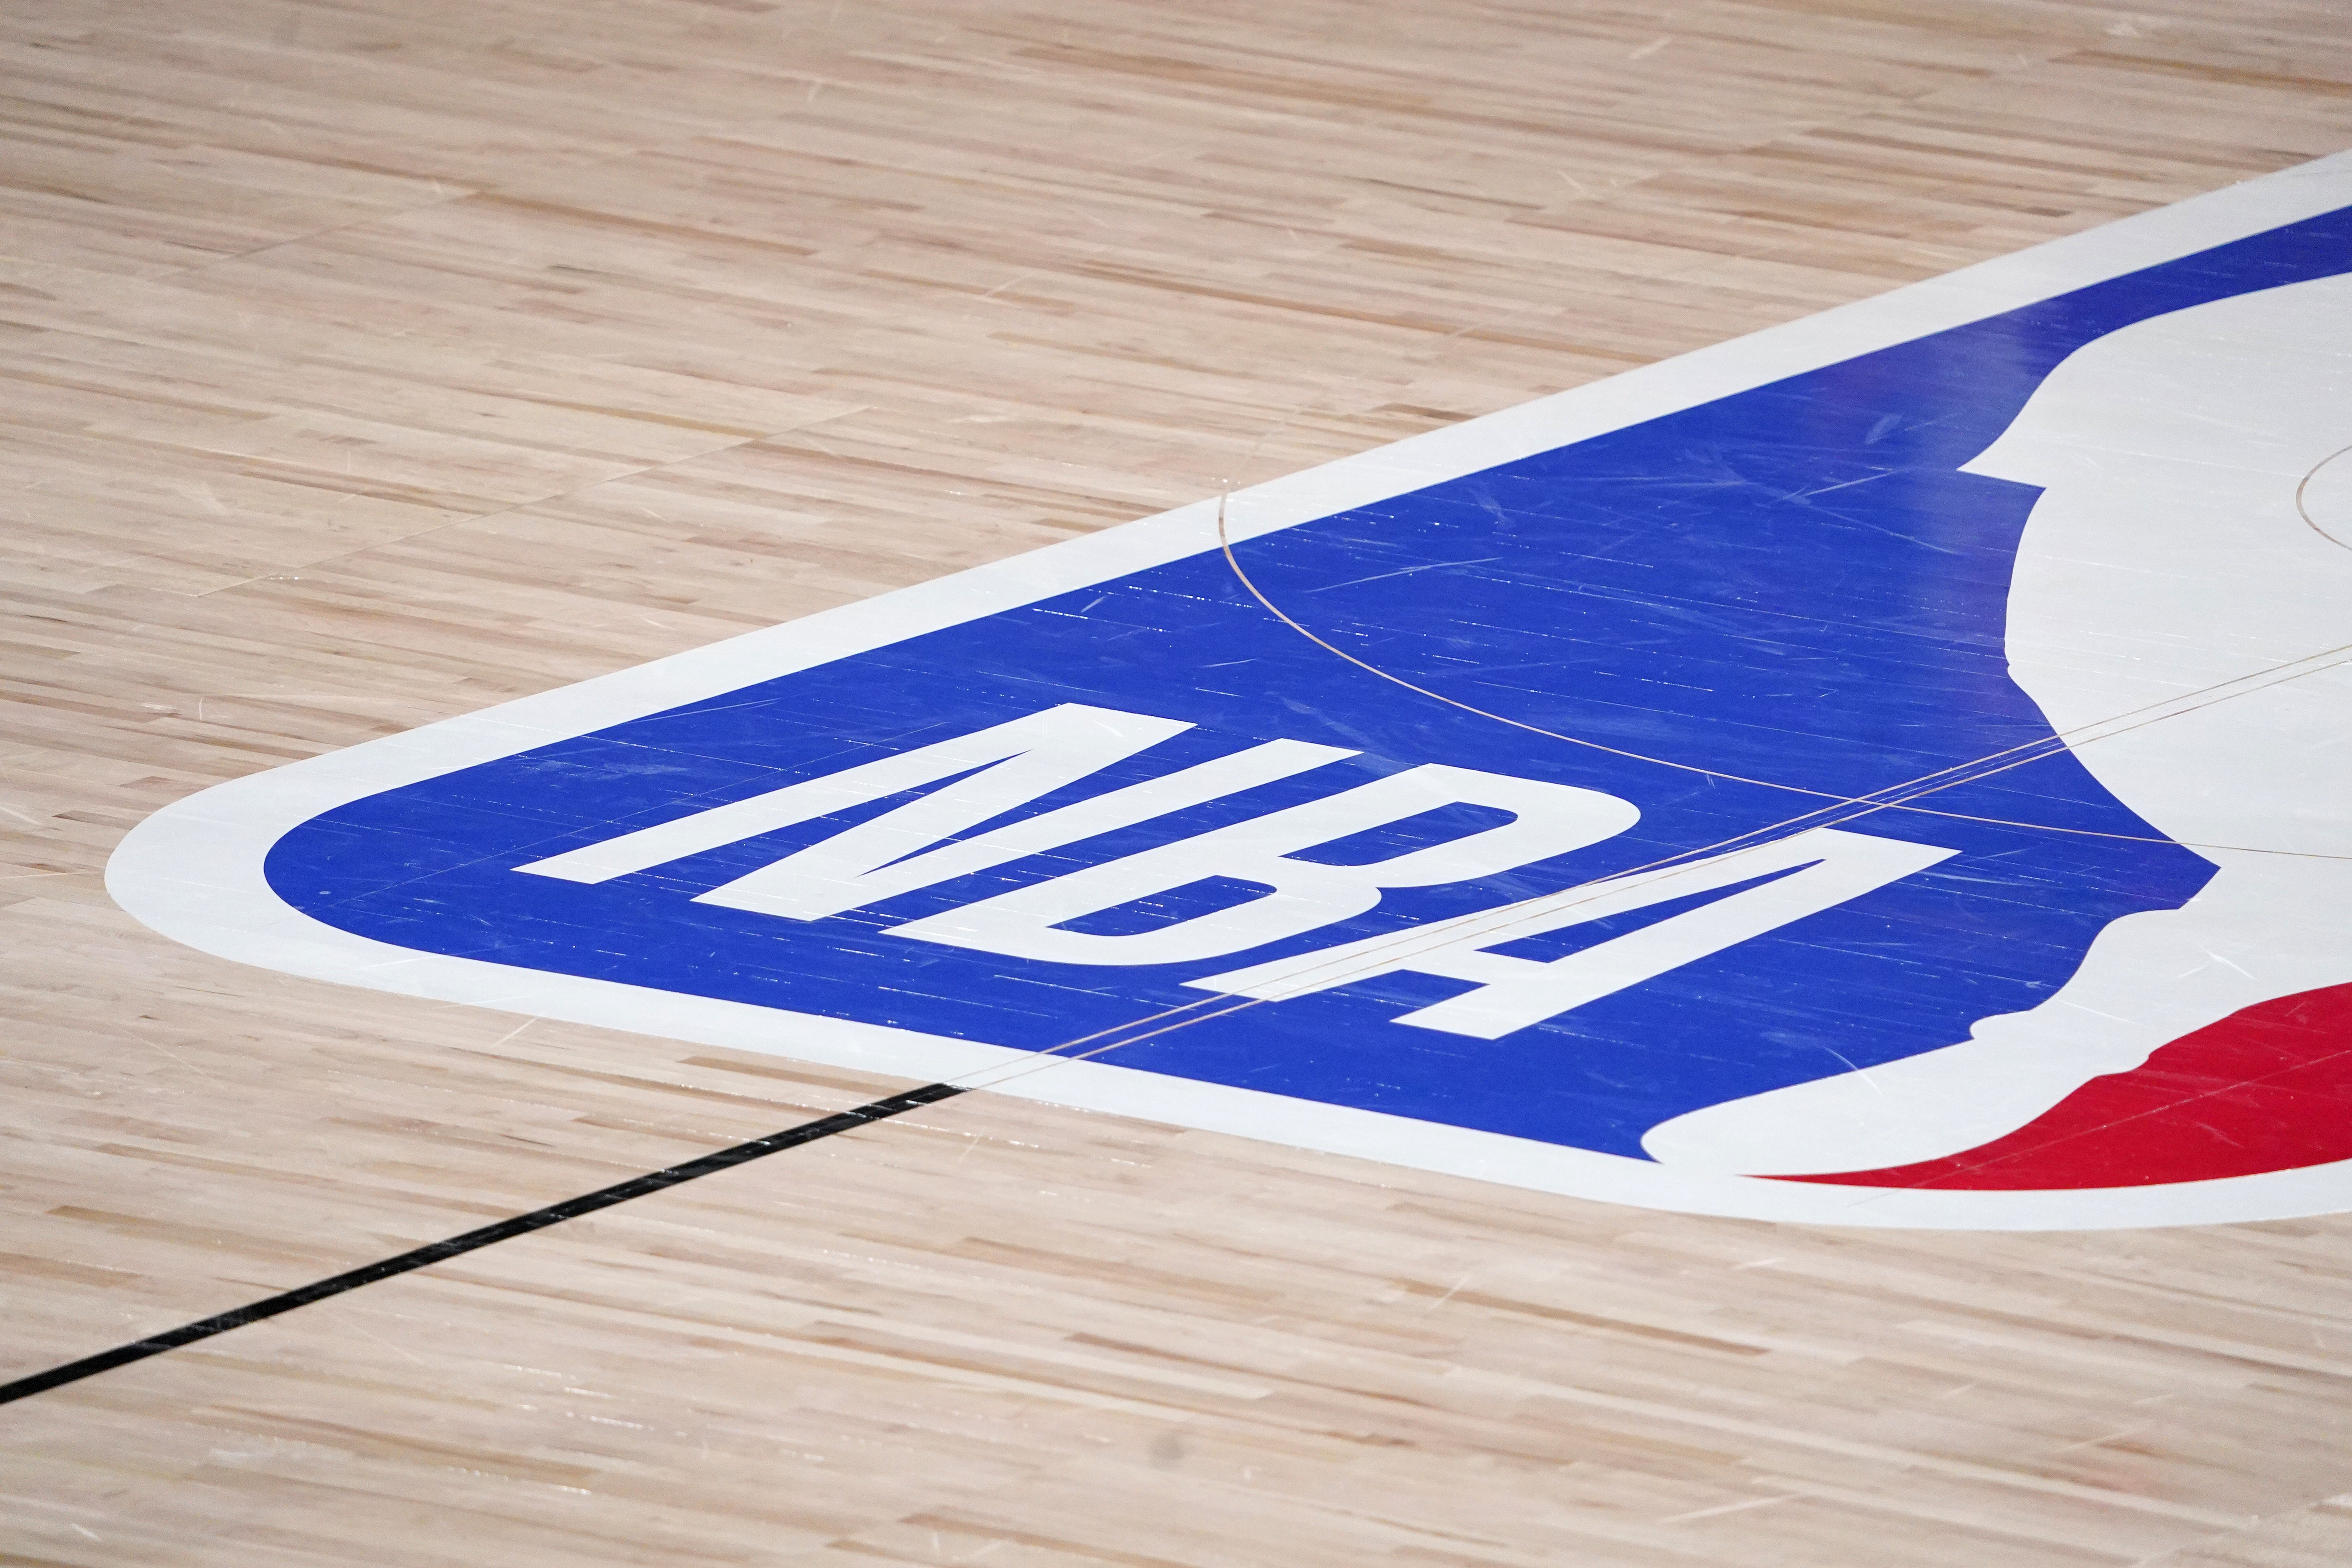 Nba Schedule 2022 Nba Schedule 2022: Regular Season, Playoffs, Finals And Key Dates  Reportedly Revealed | Bleacher Report | Latest News, Videos And Highlights